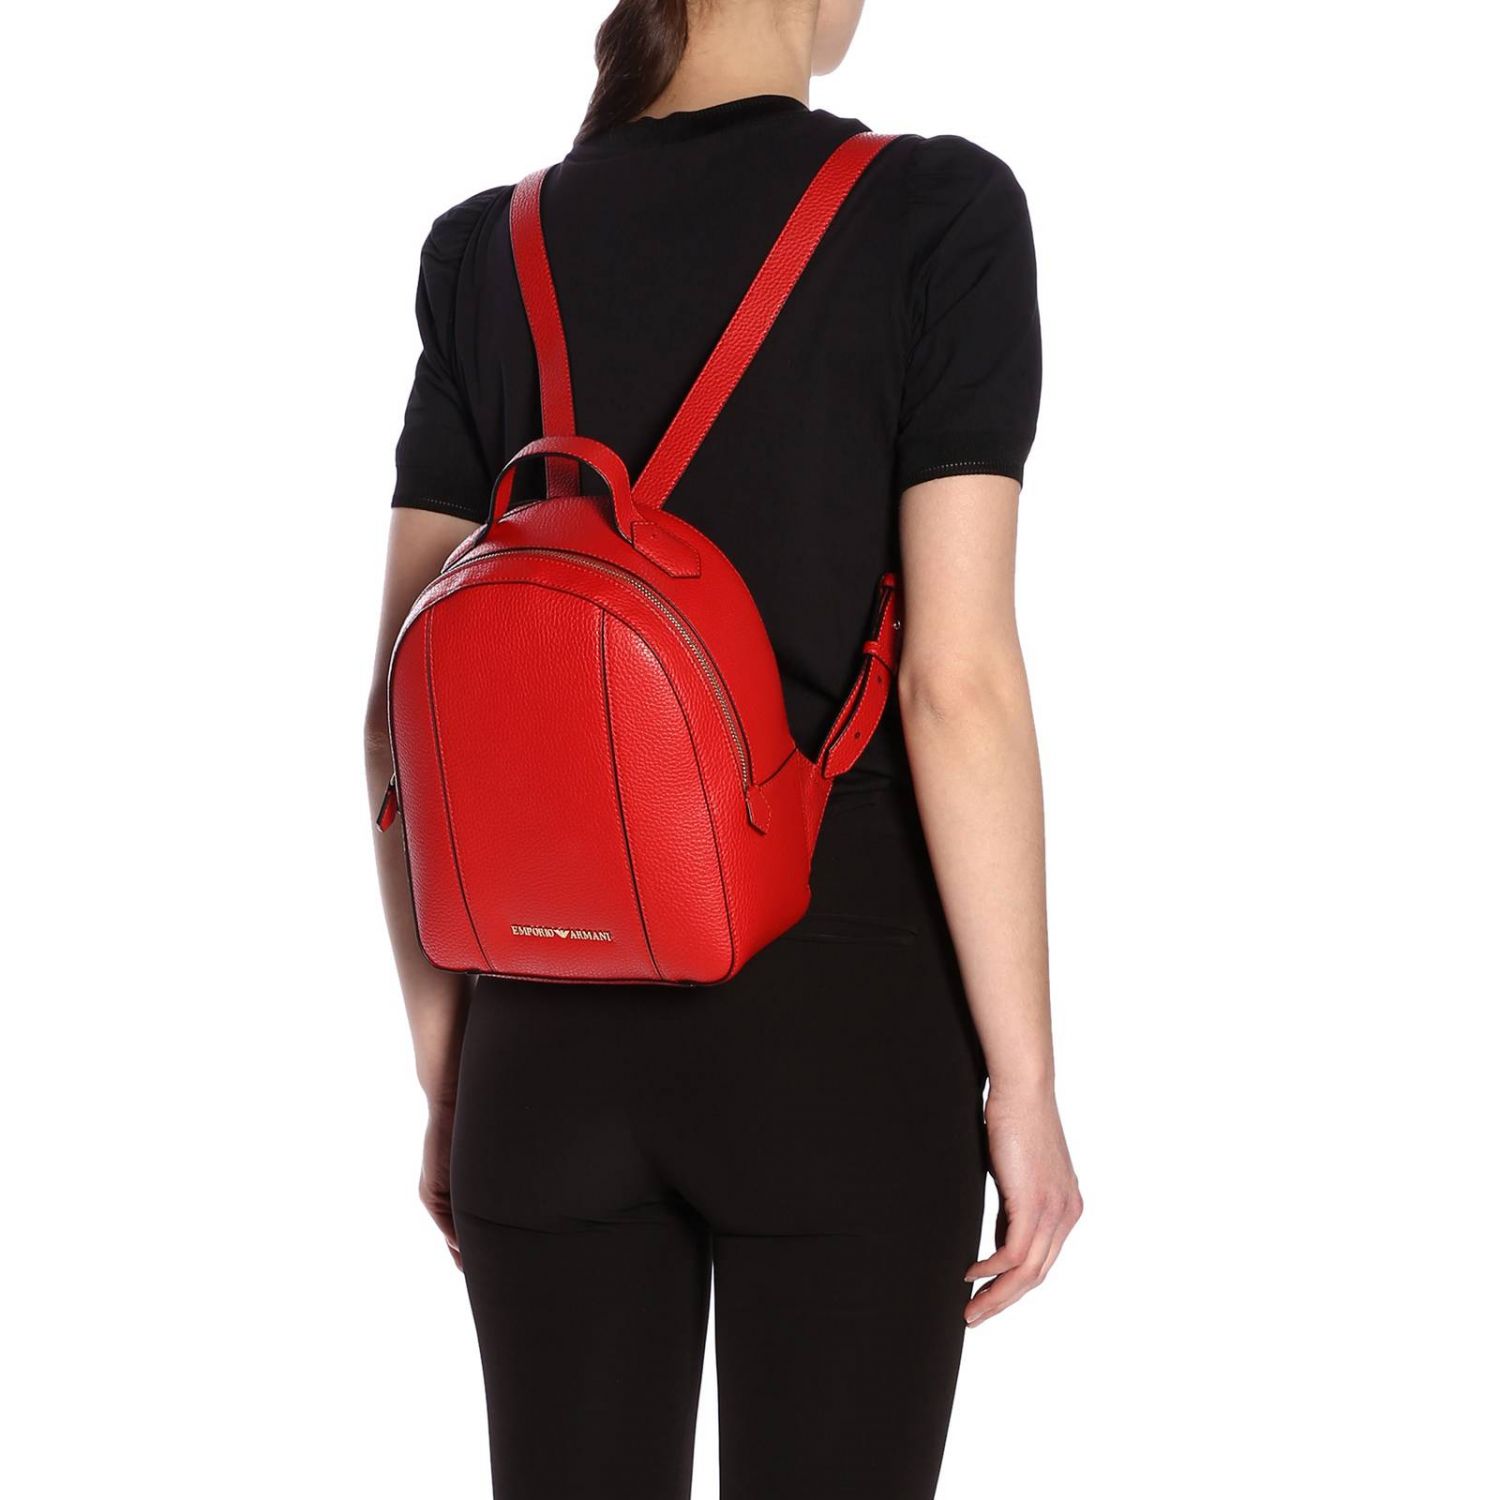 Emporio Armani Outlet: Backpack women | Backpack Emporio Armani Women